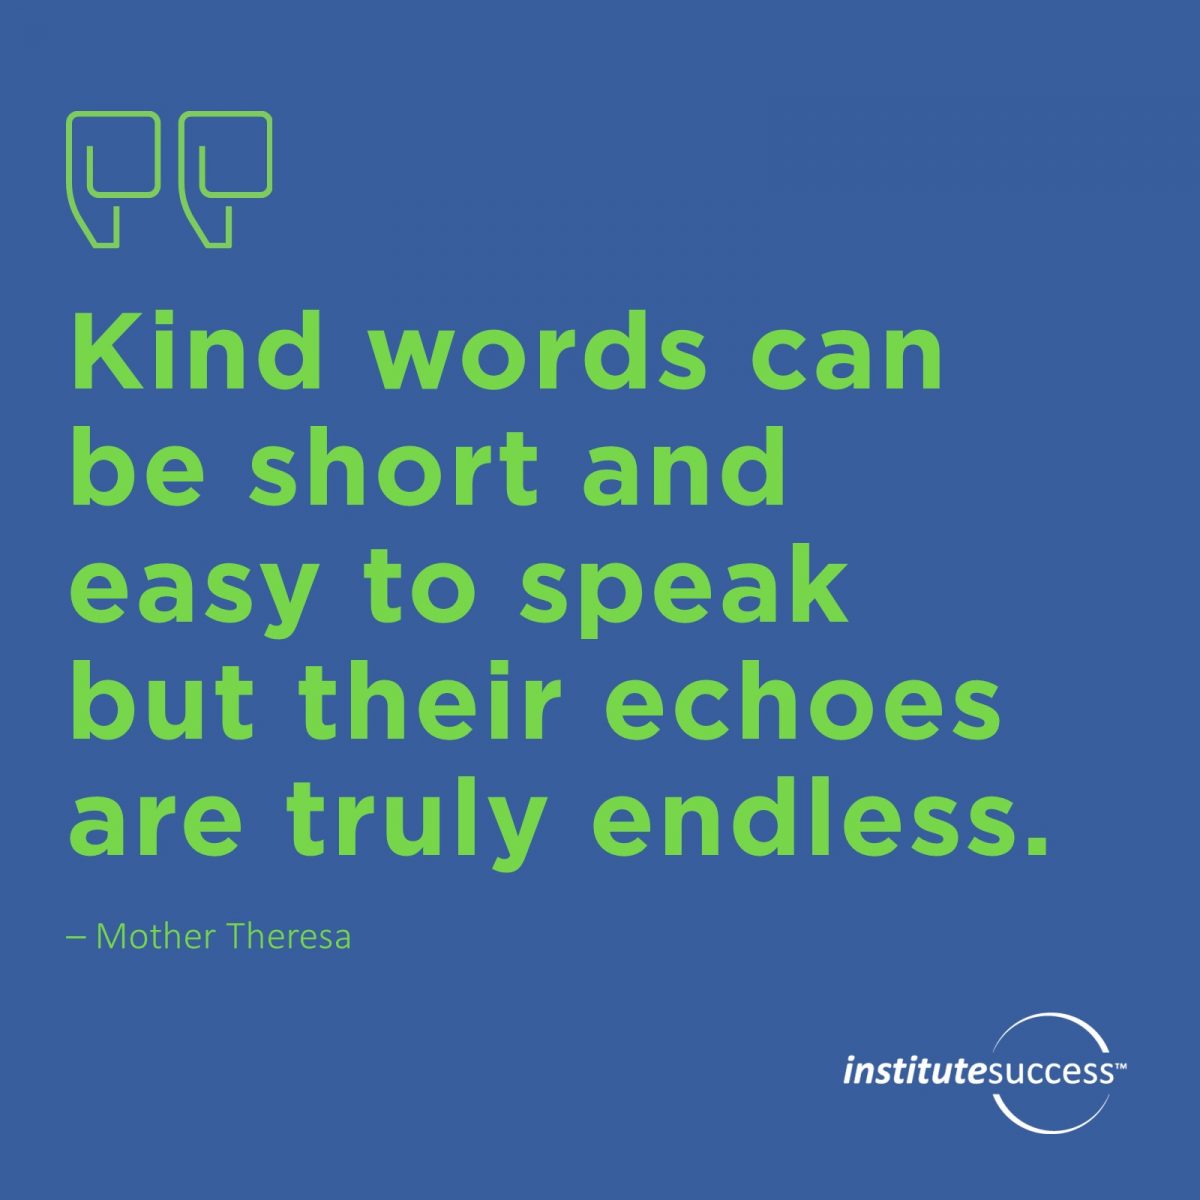 Kind words can be short and easy to speak but their echoes are truly endless – Mother Theresa